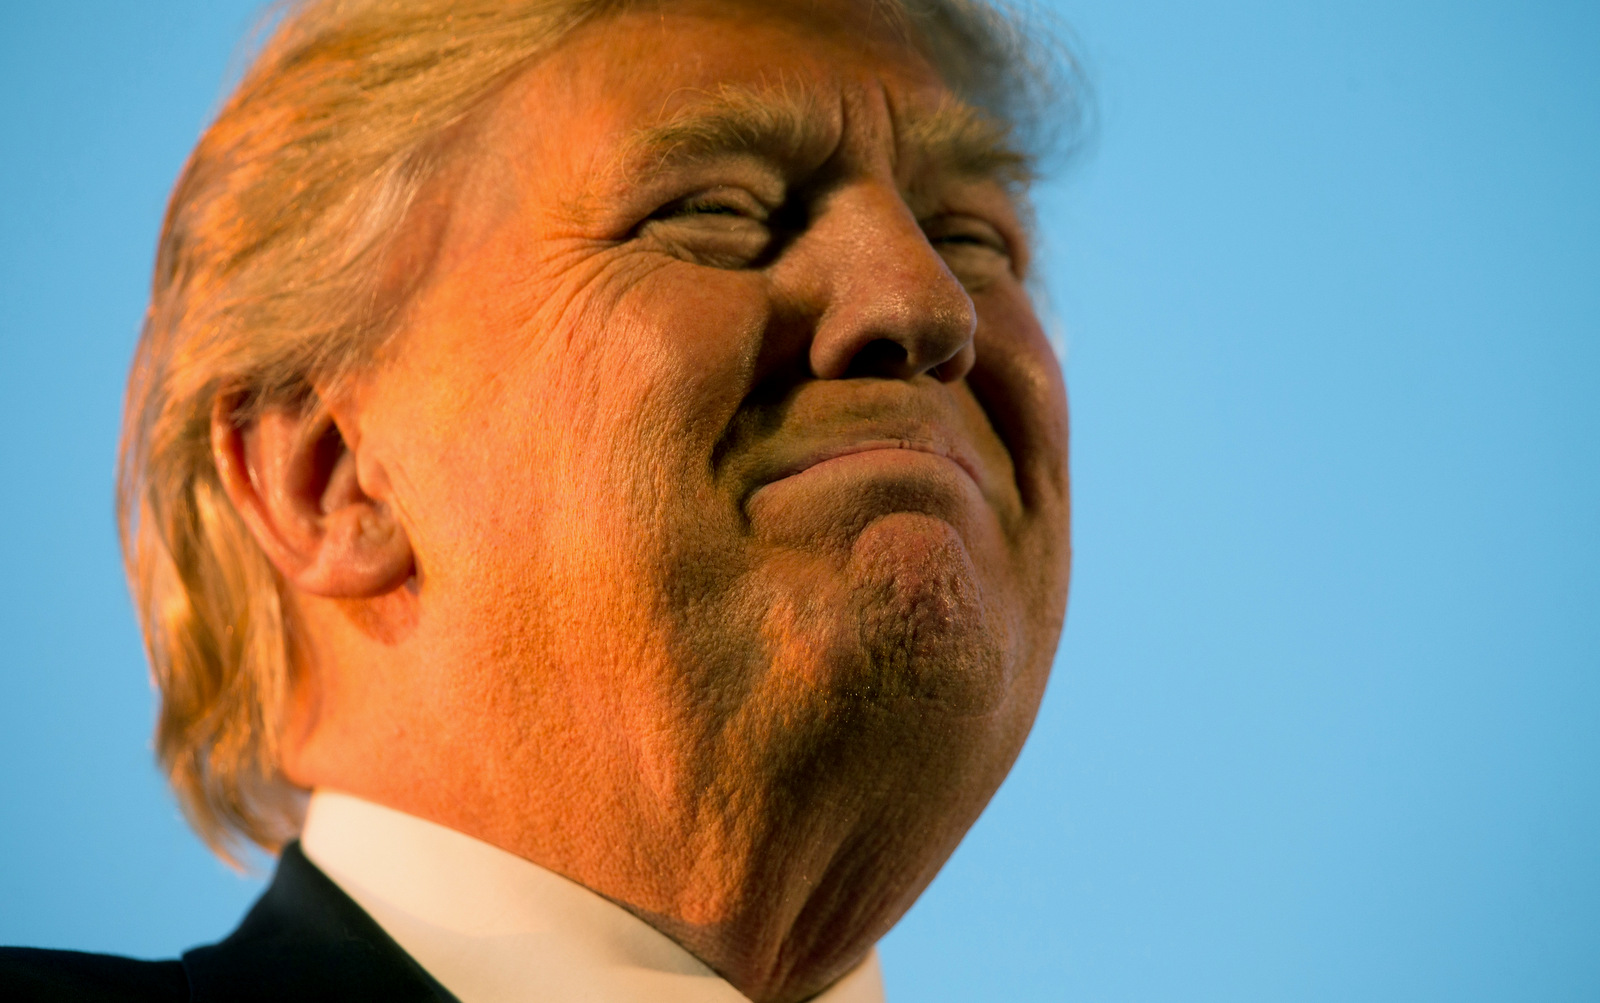 Republican presidential candidate Donald Trump pauses during while speaking at a rally in Millington, Tenn. Tough talk about torture is a guaranteed applause line for Donald Trump on the GOP presidential stump. Trump has repeatedly advocated waterboarding, an enhanced interrogation technique that simulates the feeling of drowning. (AP/Andrew Harnik)